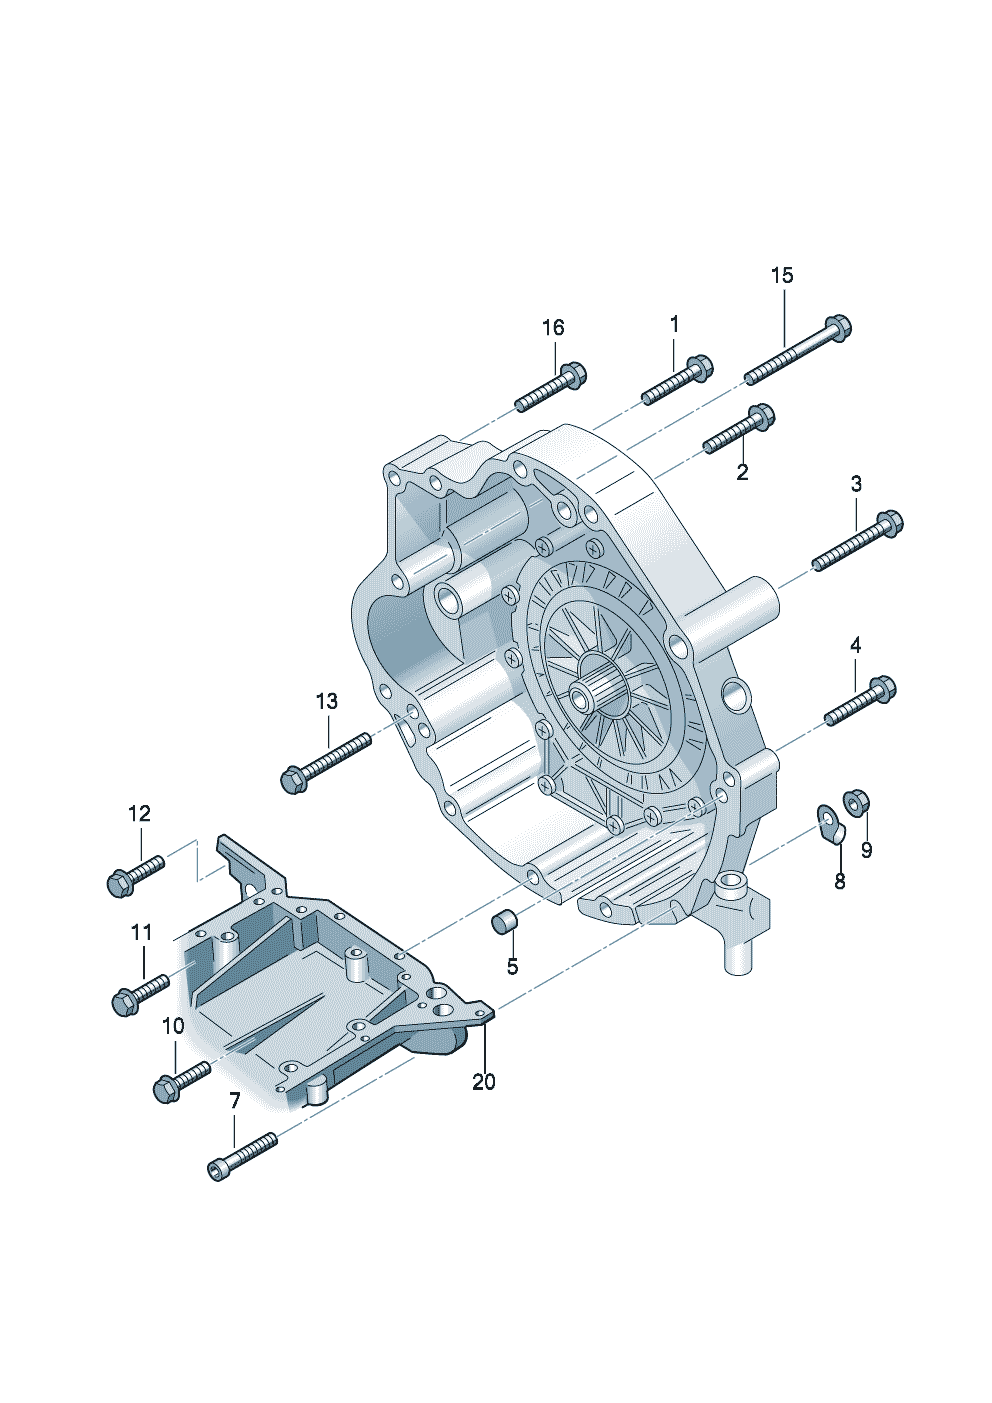 mounting parts for engine and<br>transmissionfor 6-speed automatic gearbox 4.2 Ltr. - Audi A4/Avant - a4